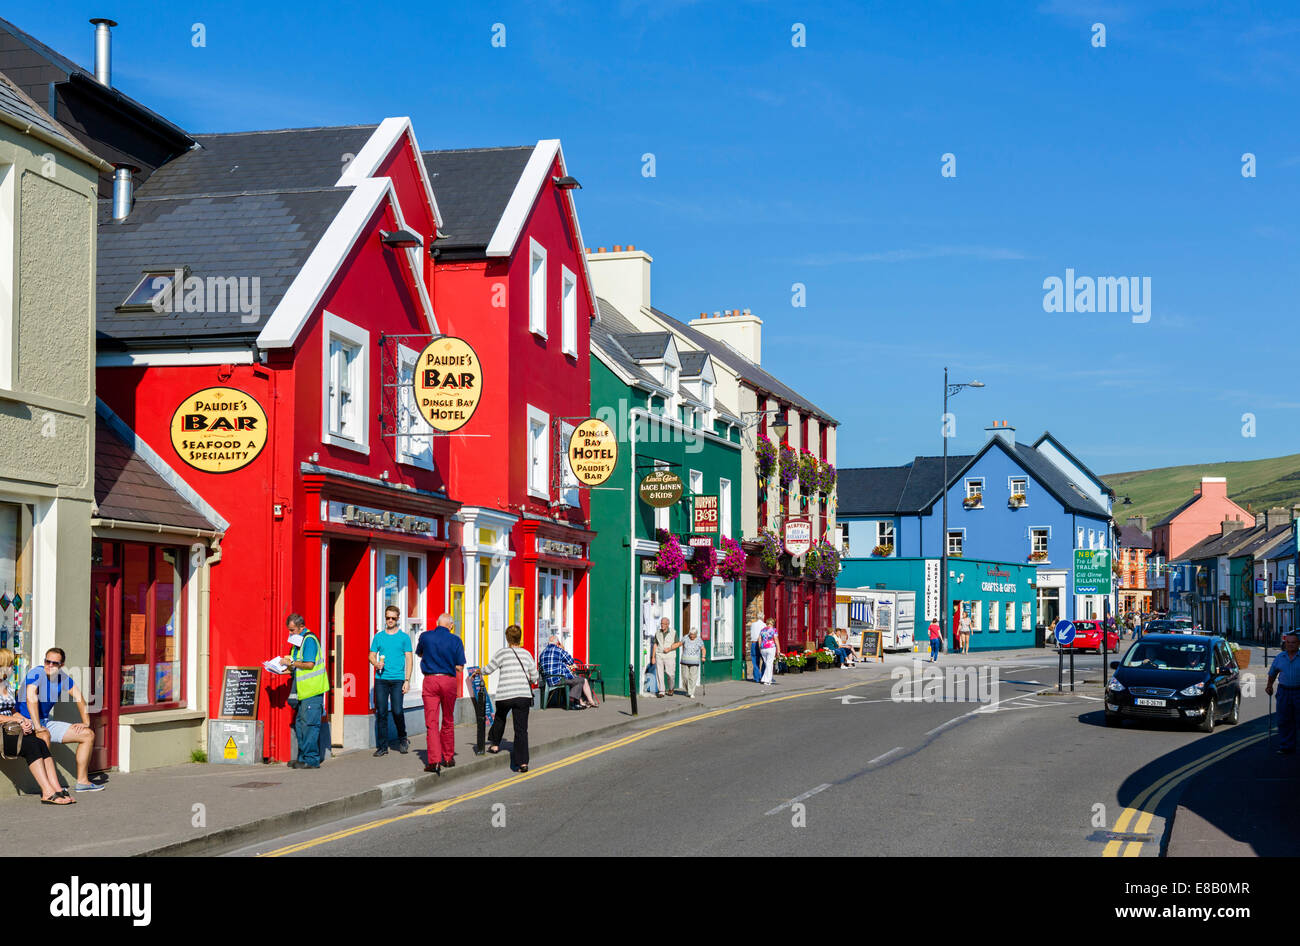 Shops, pubs and hotels on Strand Street on the waterfront in Dingle, Dingle Peninsula, County Kerry, Republic of Ireland Stock Photo